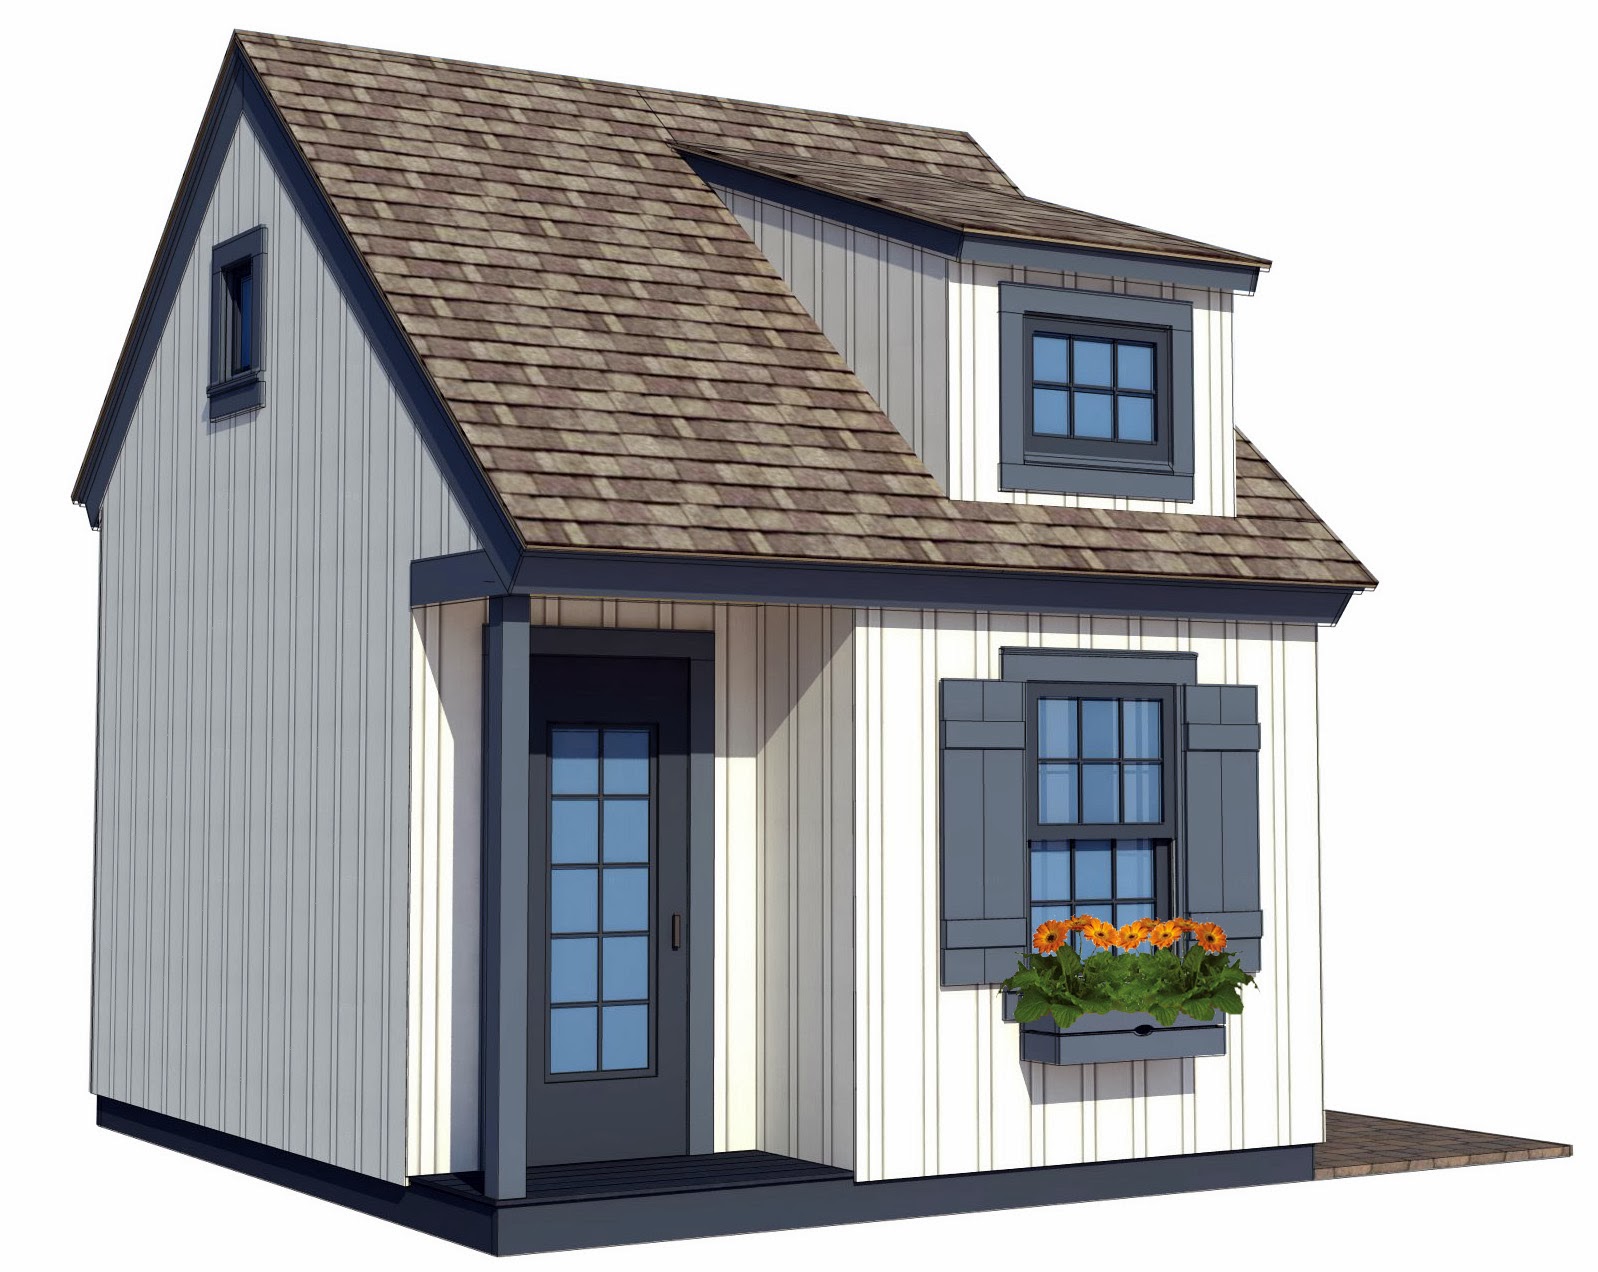 APlaceImagined: Traditional Playhouse Plans